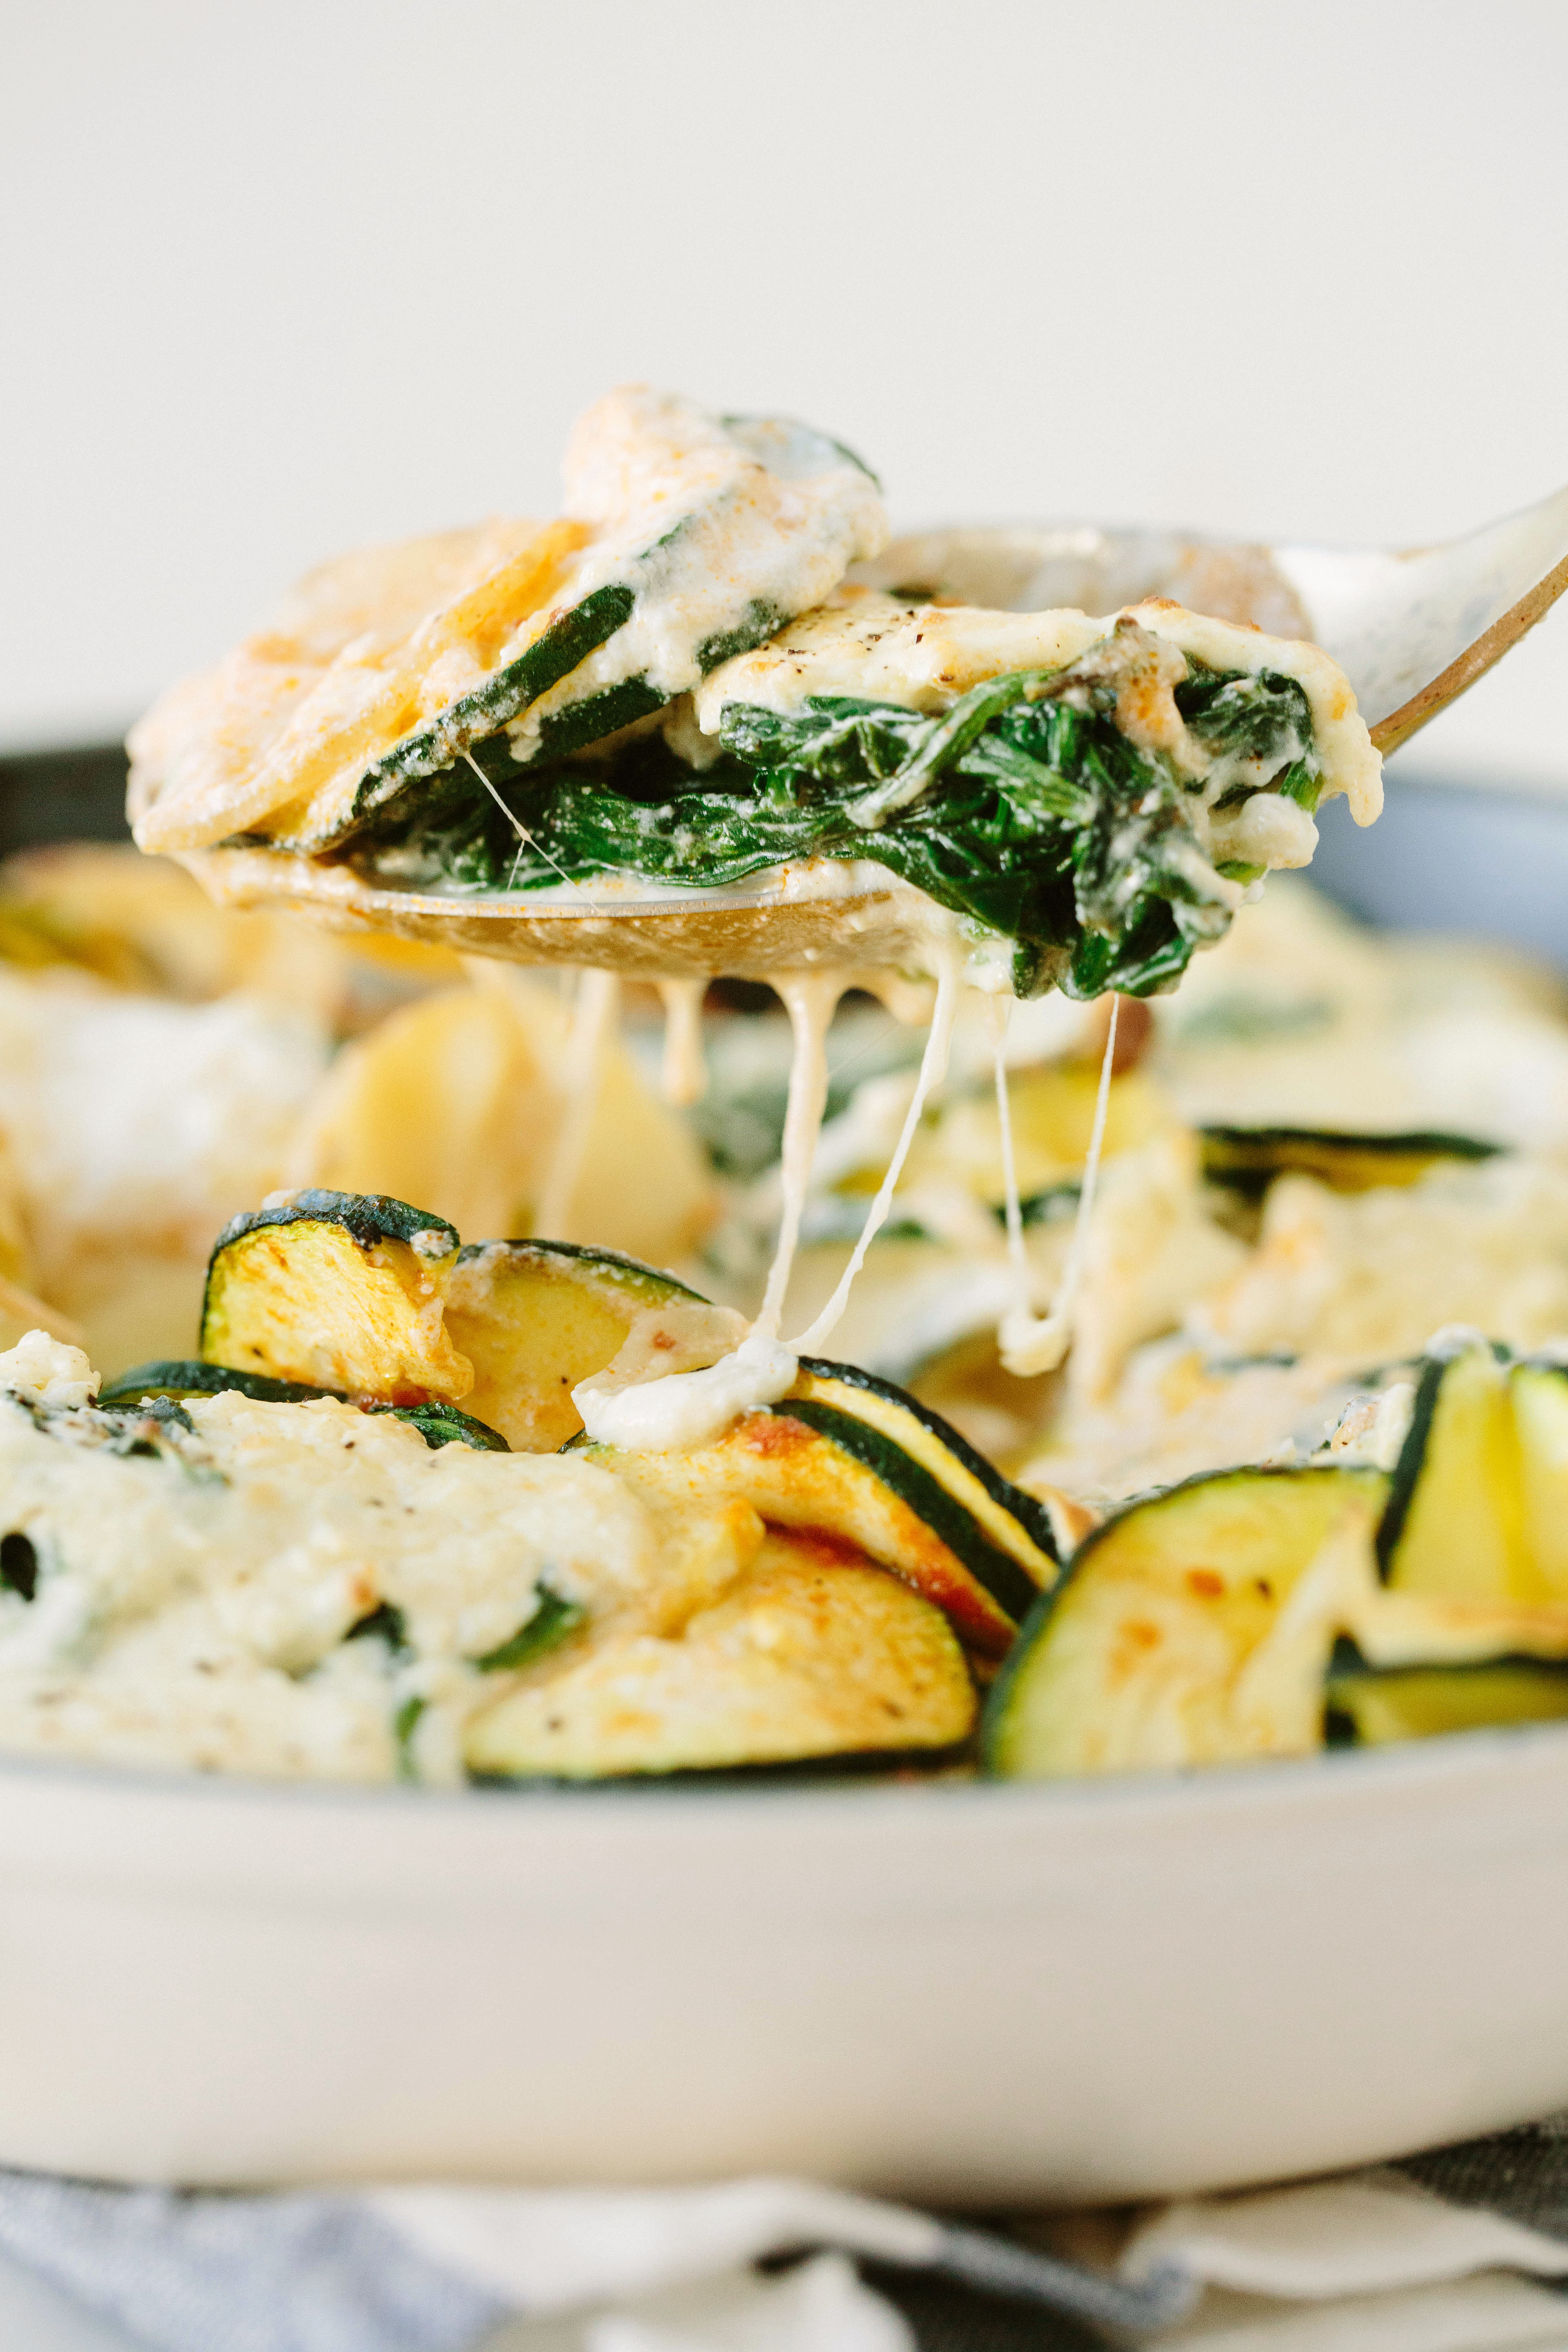 Deconstructed Spinach Manicotti with Spiralized Potatoes and Zucchini